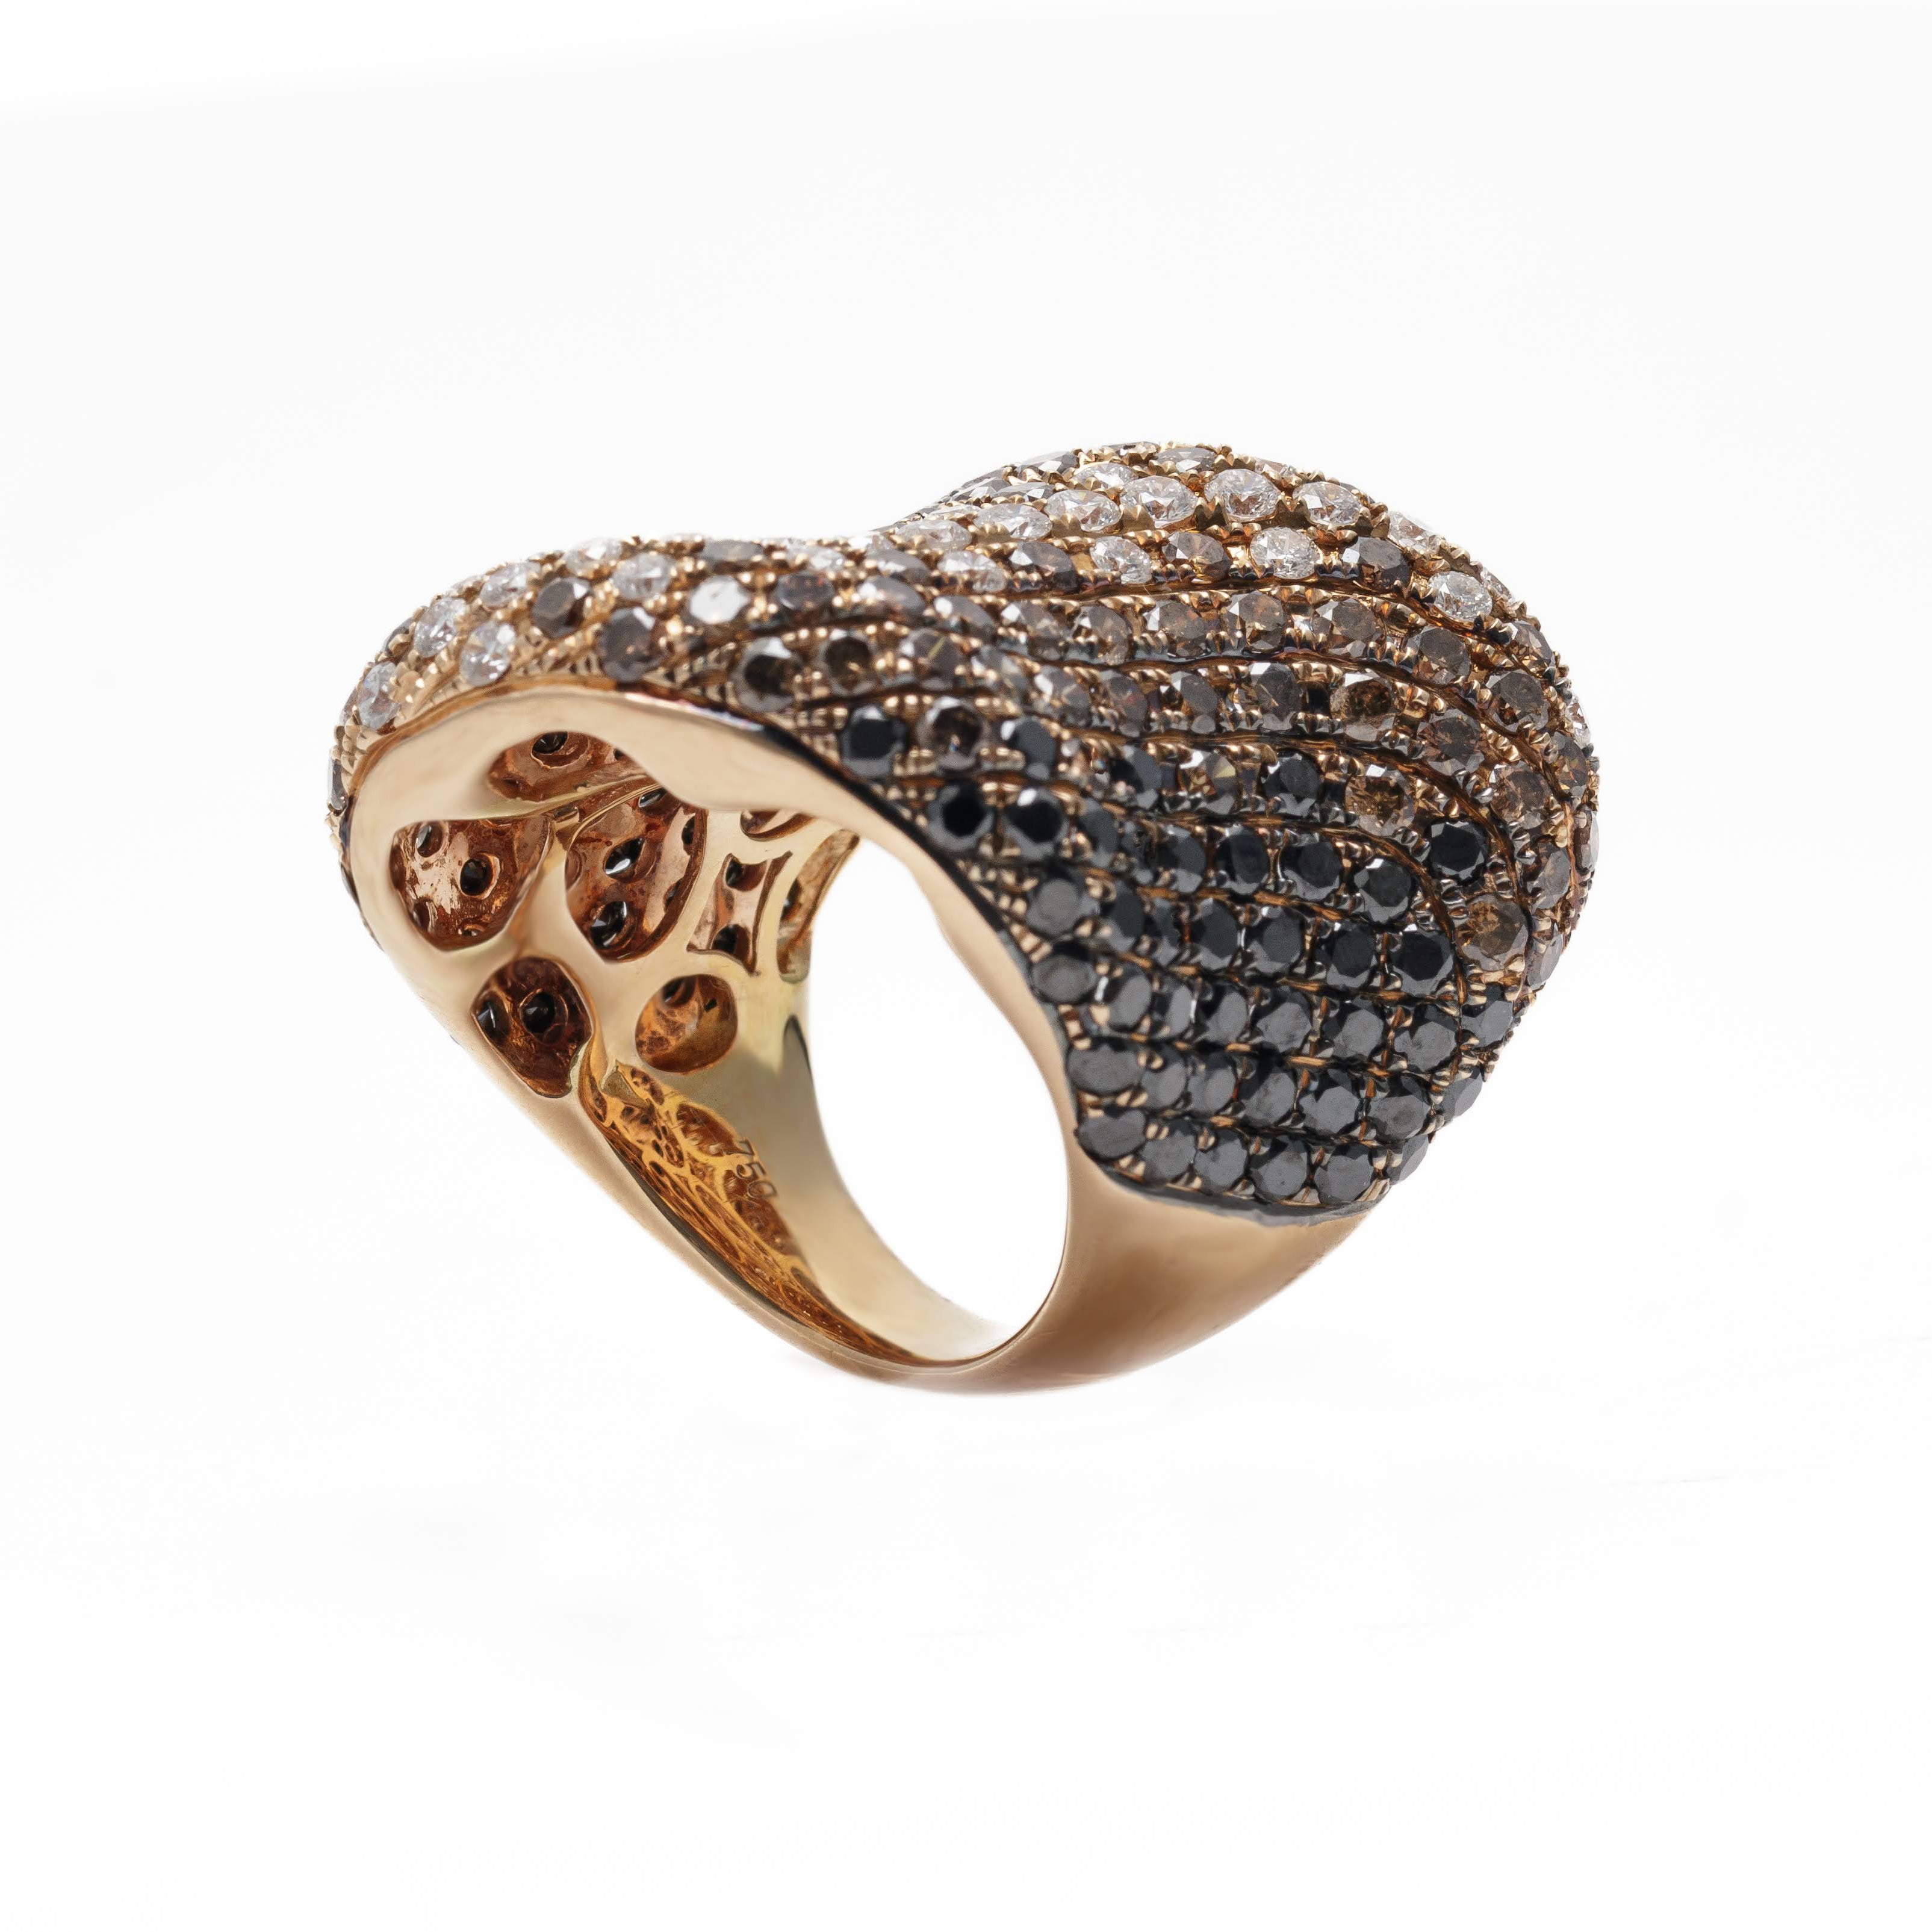 Exquisite Rose Gold Dome Ring with White and Black Diamonds